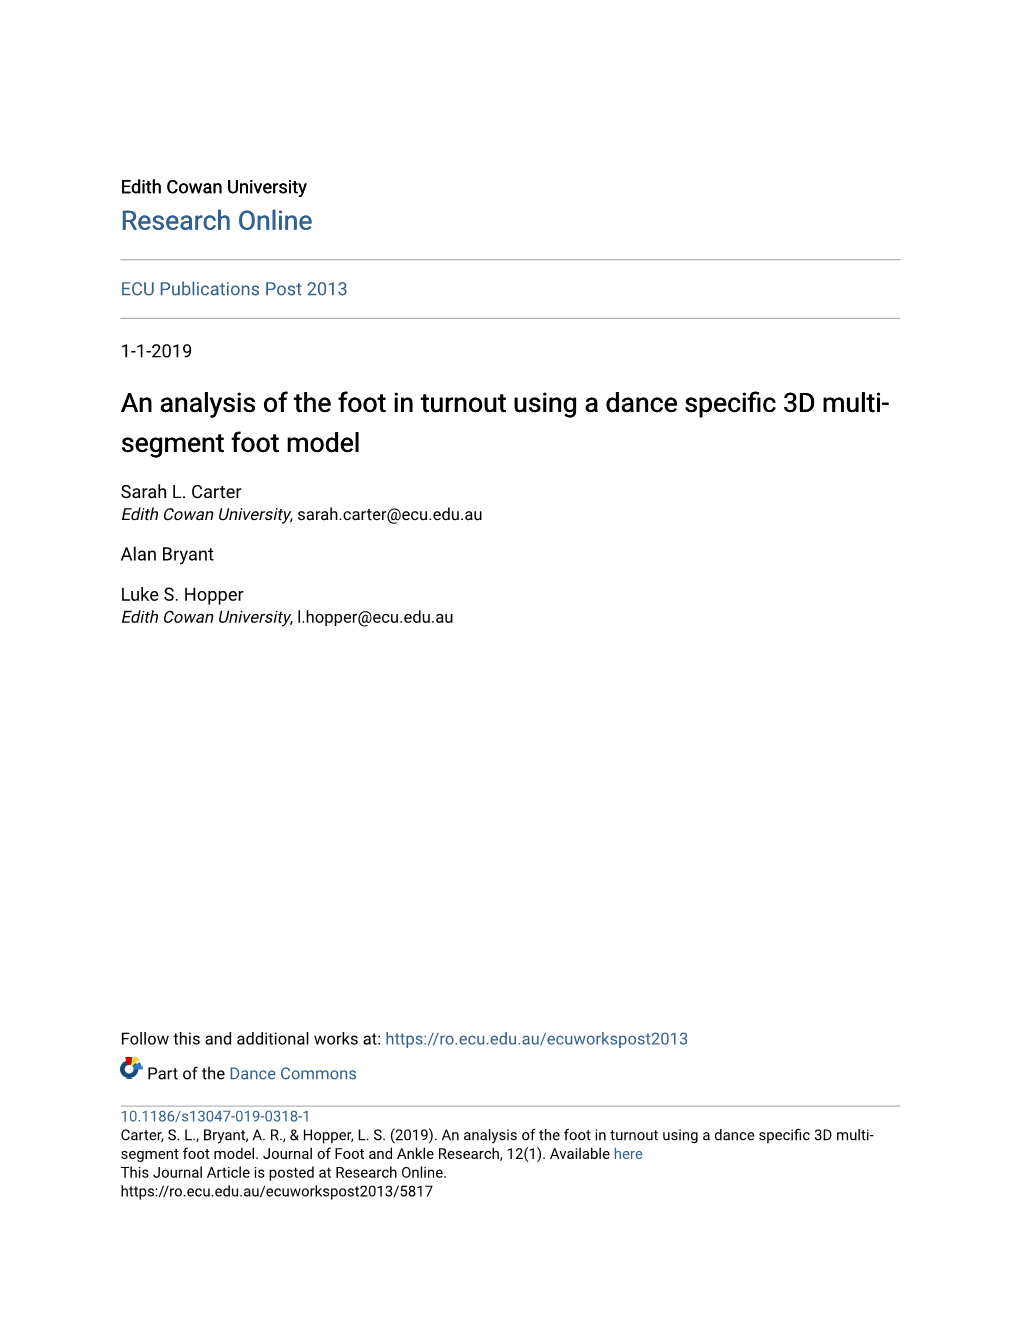 An Analysis of the Foot in Turnout Using a Dance Specific 3D Multi-Segment Foot Model Sarah L